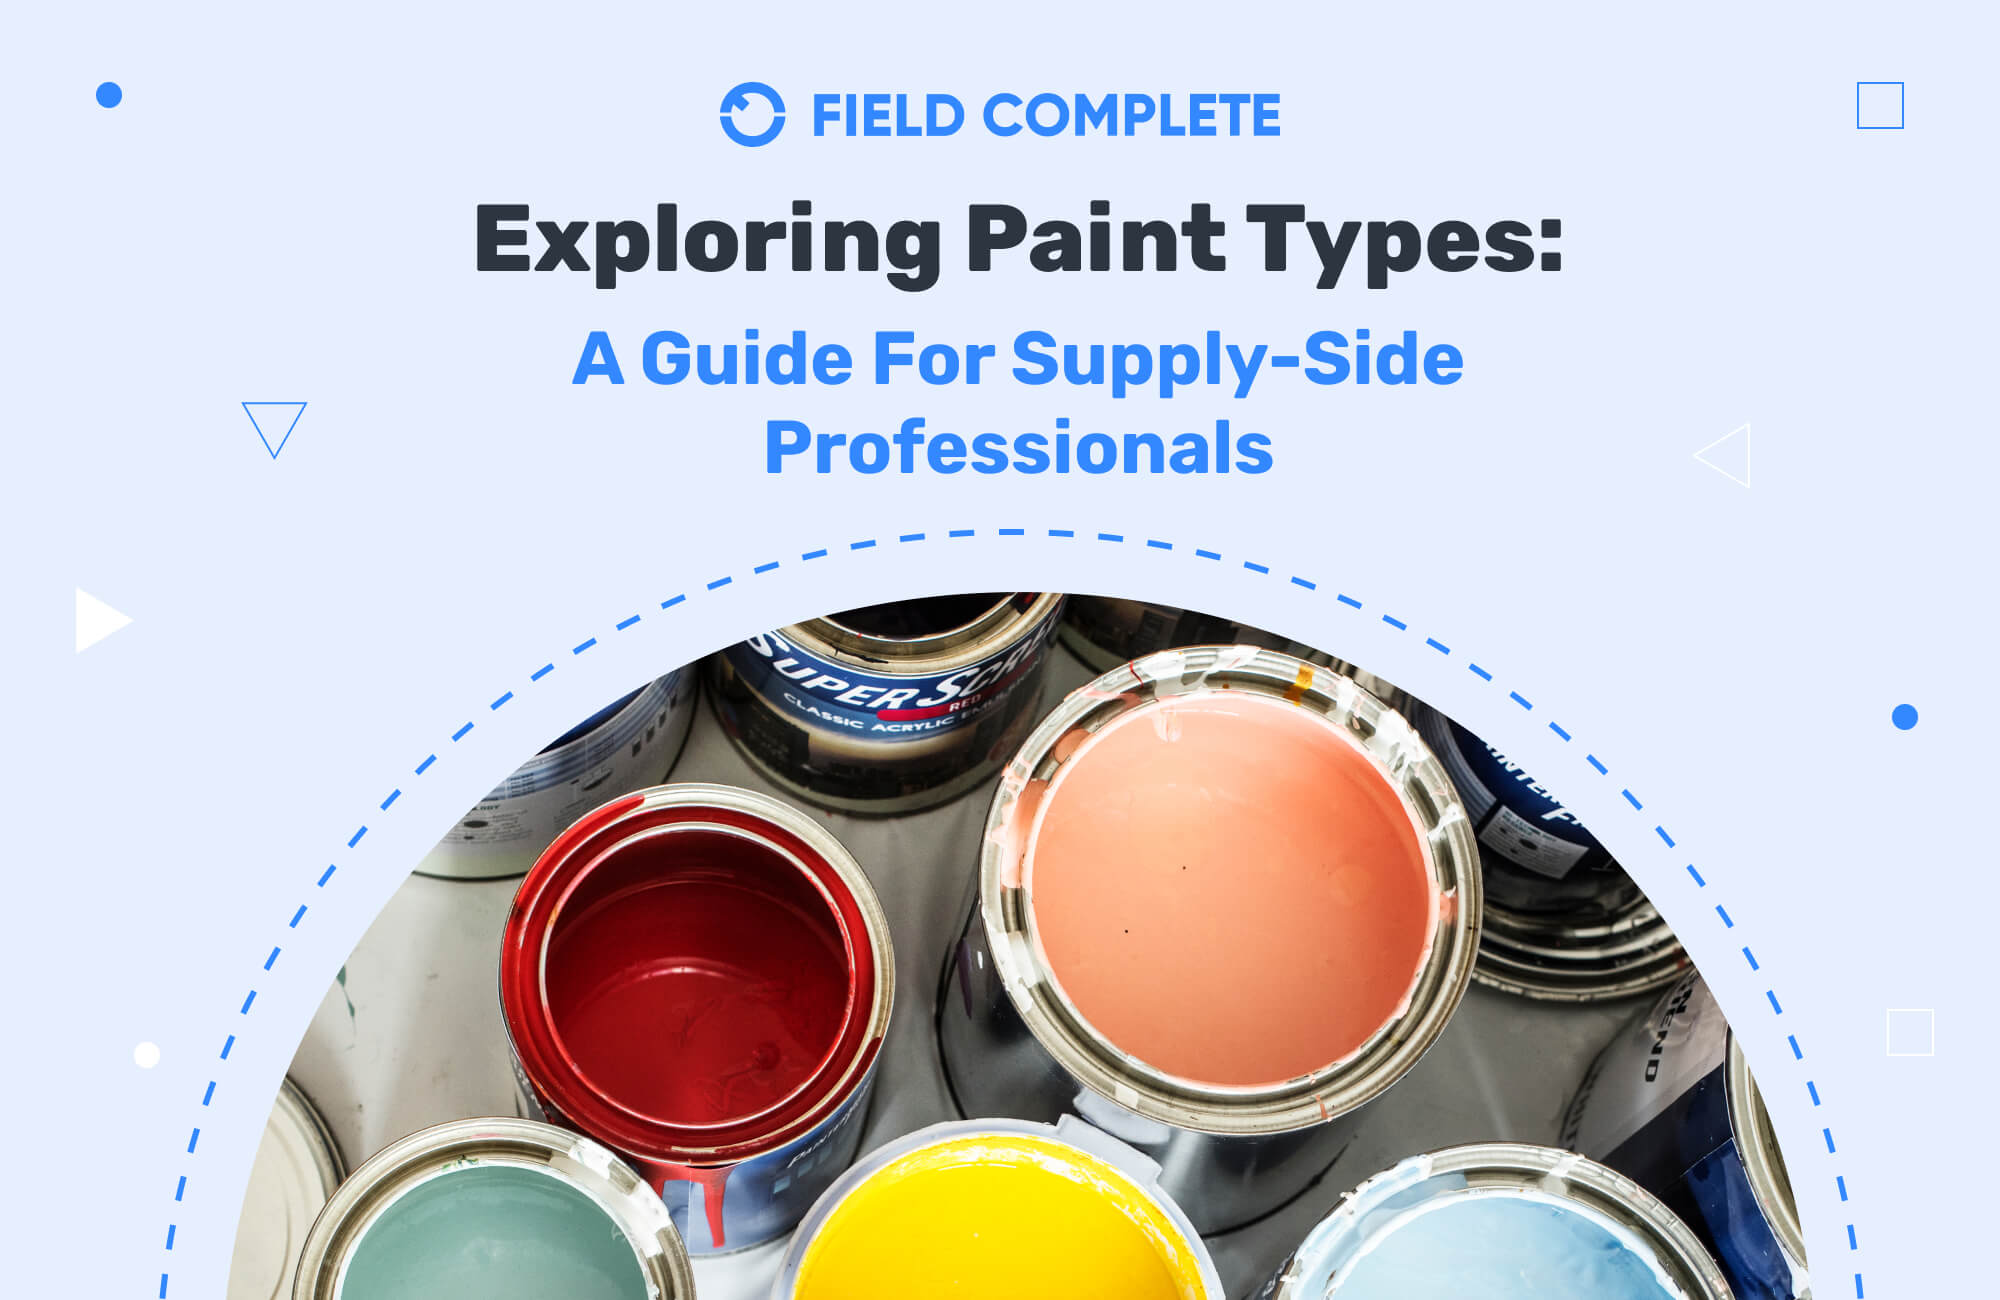 Exploring Paint Types: A Guide for Supply-Side Professionals